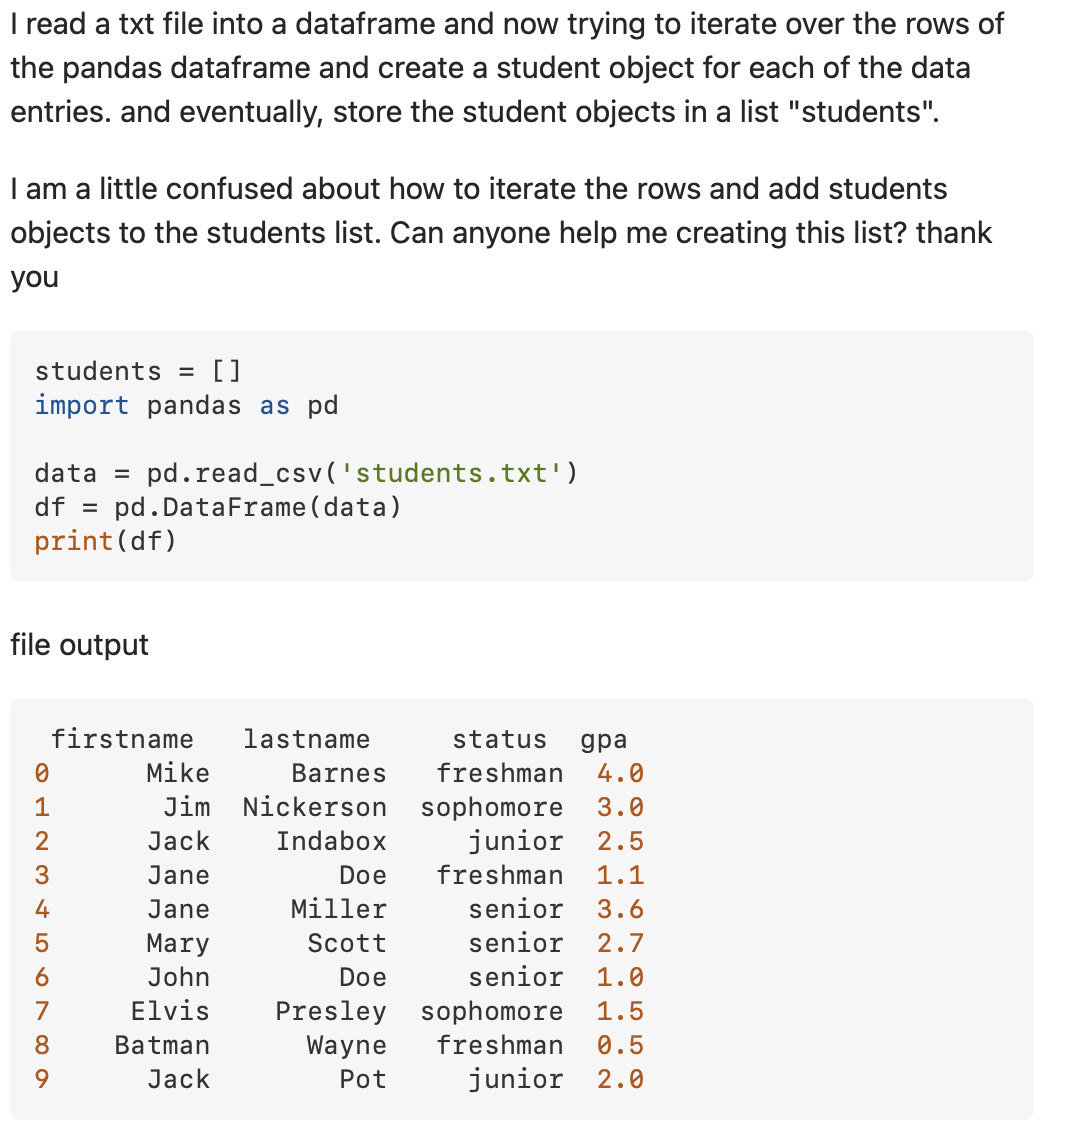 I read a txt file into a dataframe and now trying to iterate over the rows of
the pandas dataframe and create a student object for each of the data
entries. and eventually, store the student objects in a list "students".
I am a little confused about how to iterate the rows and add students
objects to the students list. Can anyone help me creating this list? thank
you
students =
[]
import pandas as pd
pd.read_csv('students.txt')
pd. DataFrame (data)
data =
df =
print(df)
file output
firstname
lastname
status
дра
Mike
Barnes
freshman
4.0
1
Jim Nickerson sophomore
3.0
2
Jack
Indabox
junior 2.5
Jane
Doe
freshman
1.1
4
Jane
Miller
senior
3.6
Mary
Scott
senior
2.7
6
John
Doe
senior
1.0
7
Elvis
Presley sophomore
Wayne
1.5
8.
Batman
freshman
0.5
9.
Jack
Pot
junior
2.0
